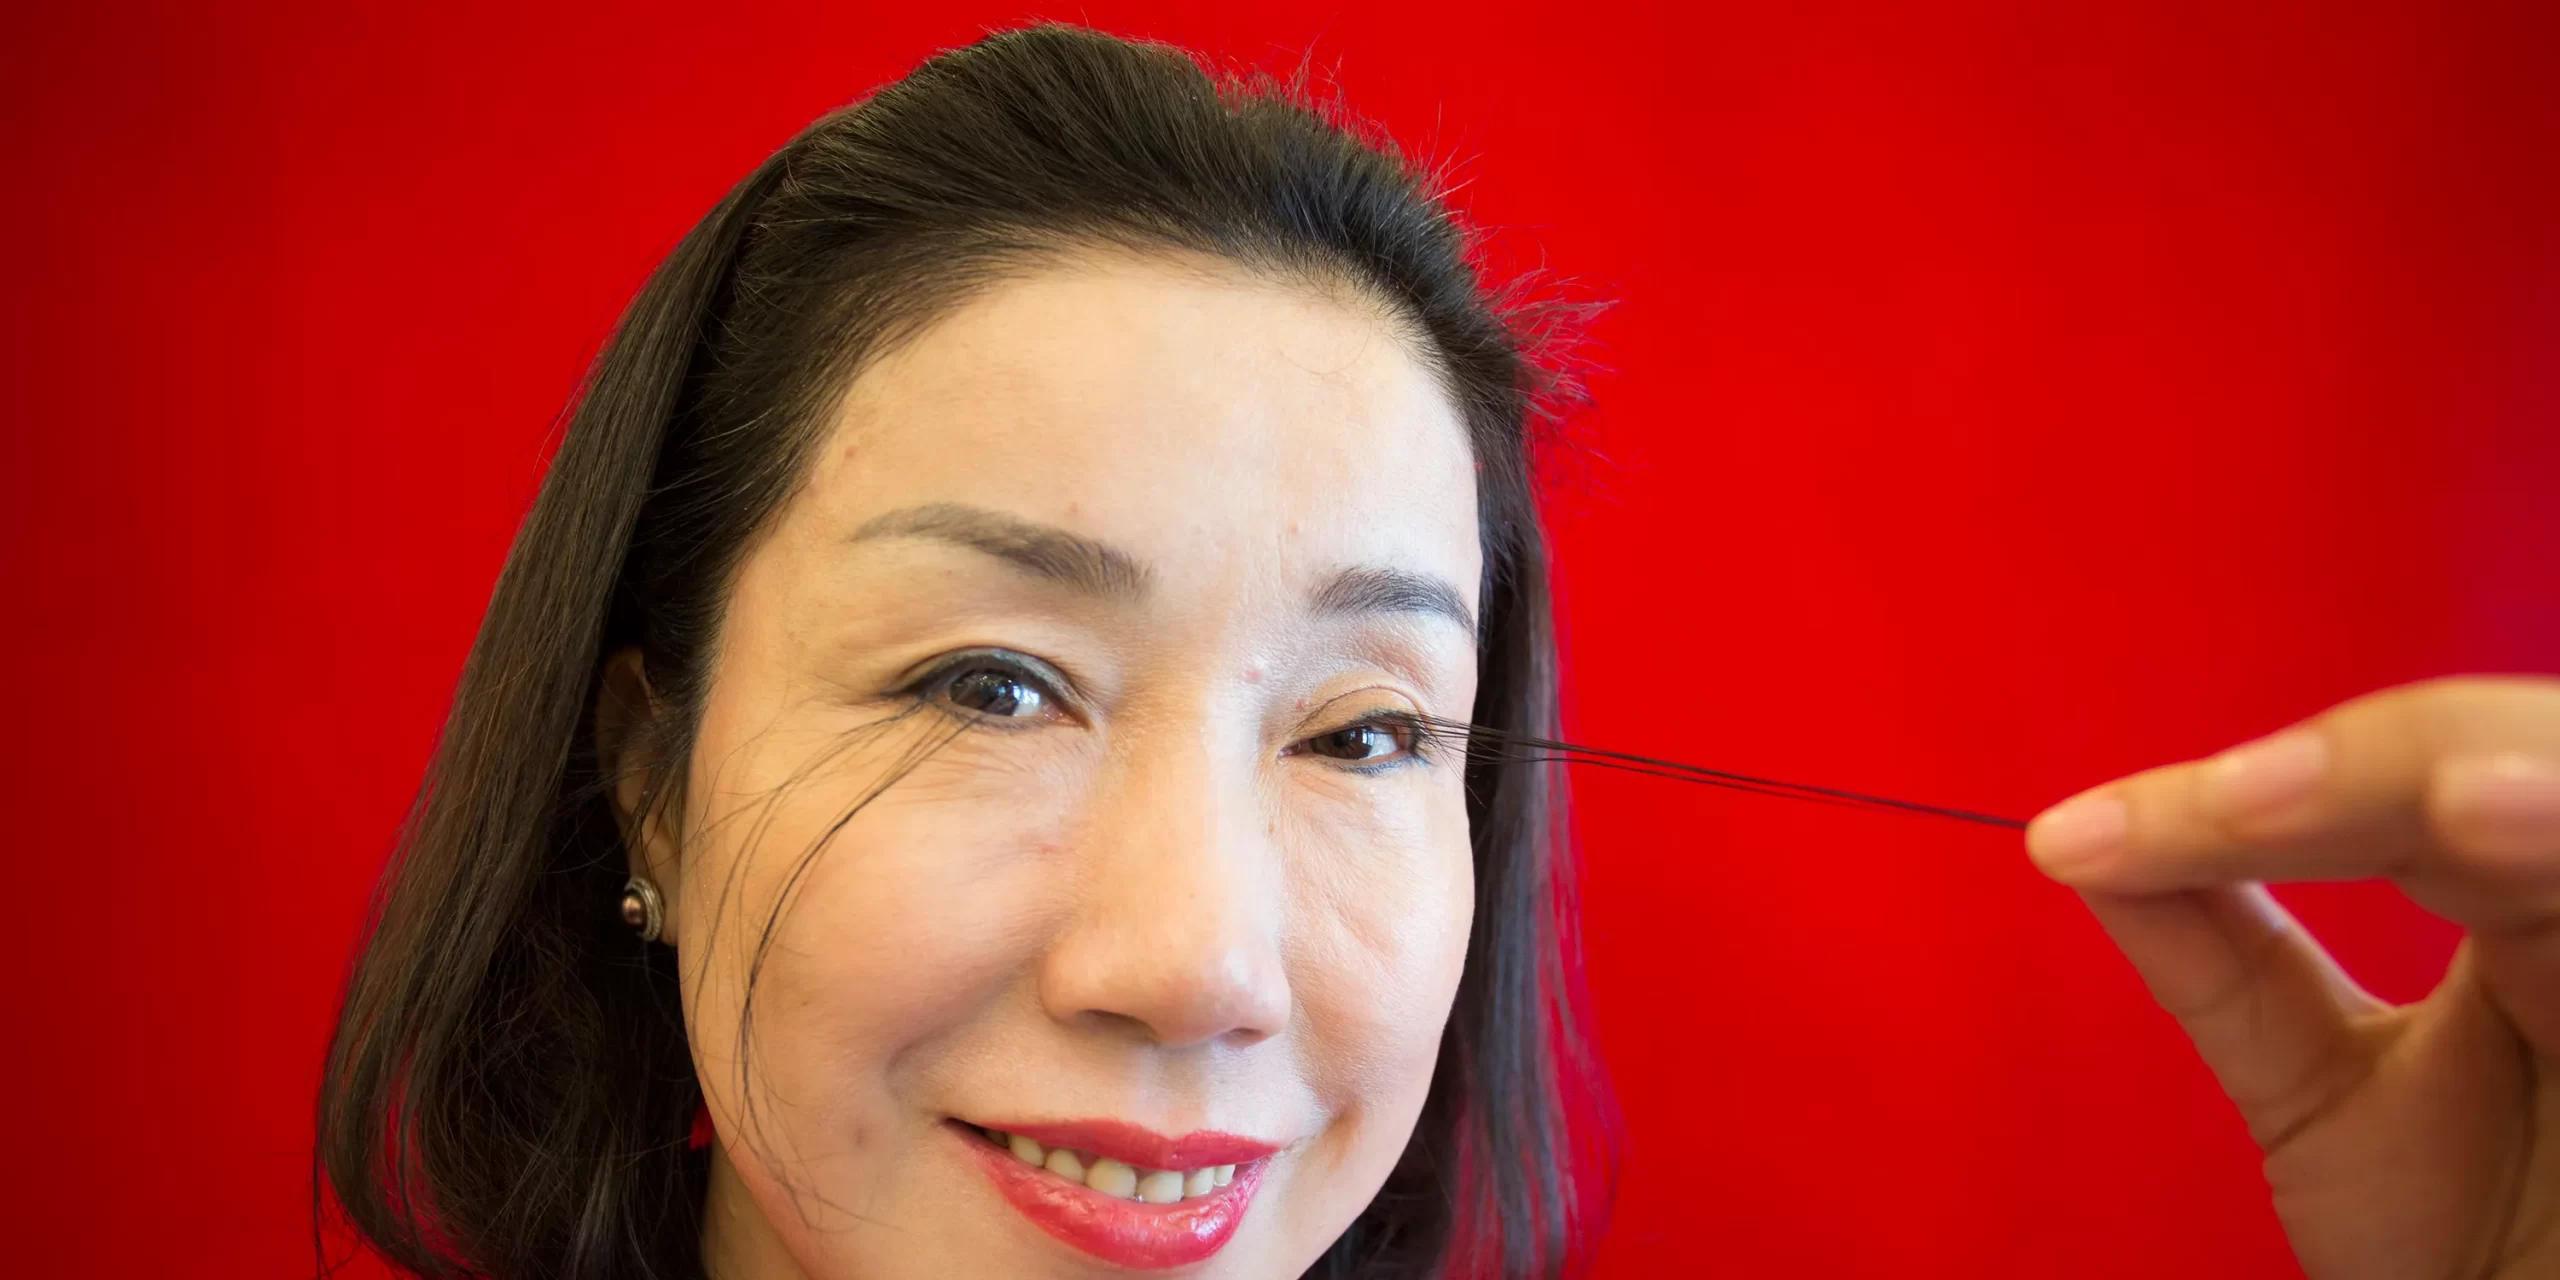 Meet You Jianxia, the Woman with the Longest Lashes in the World